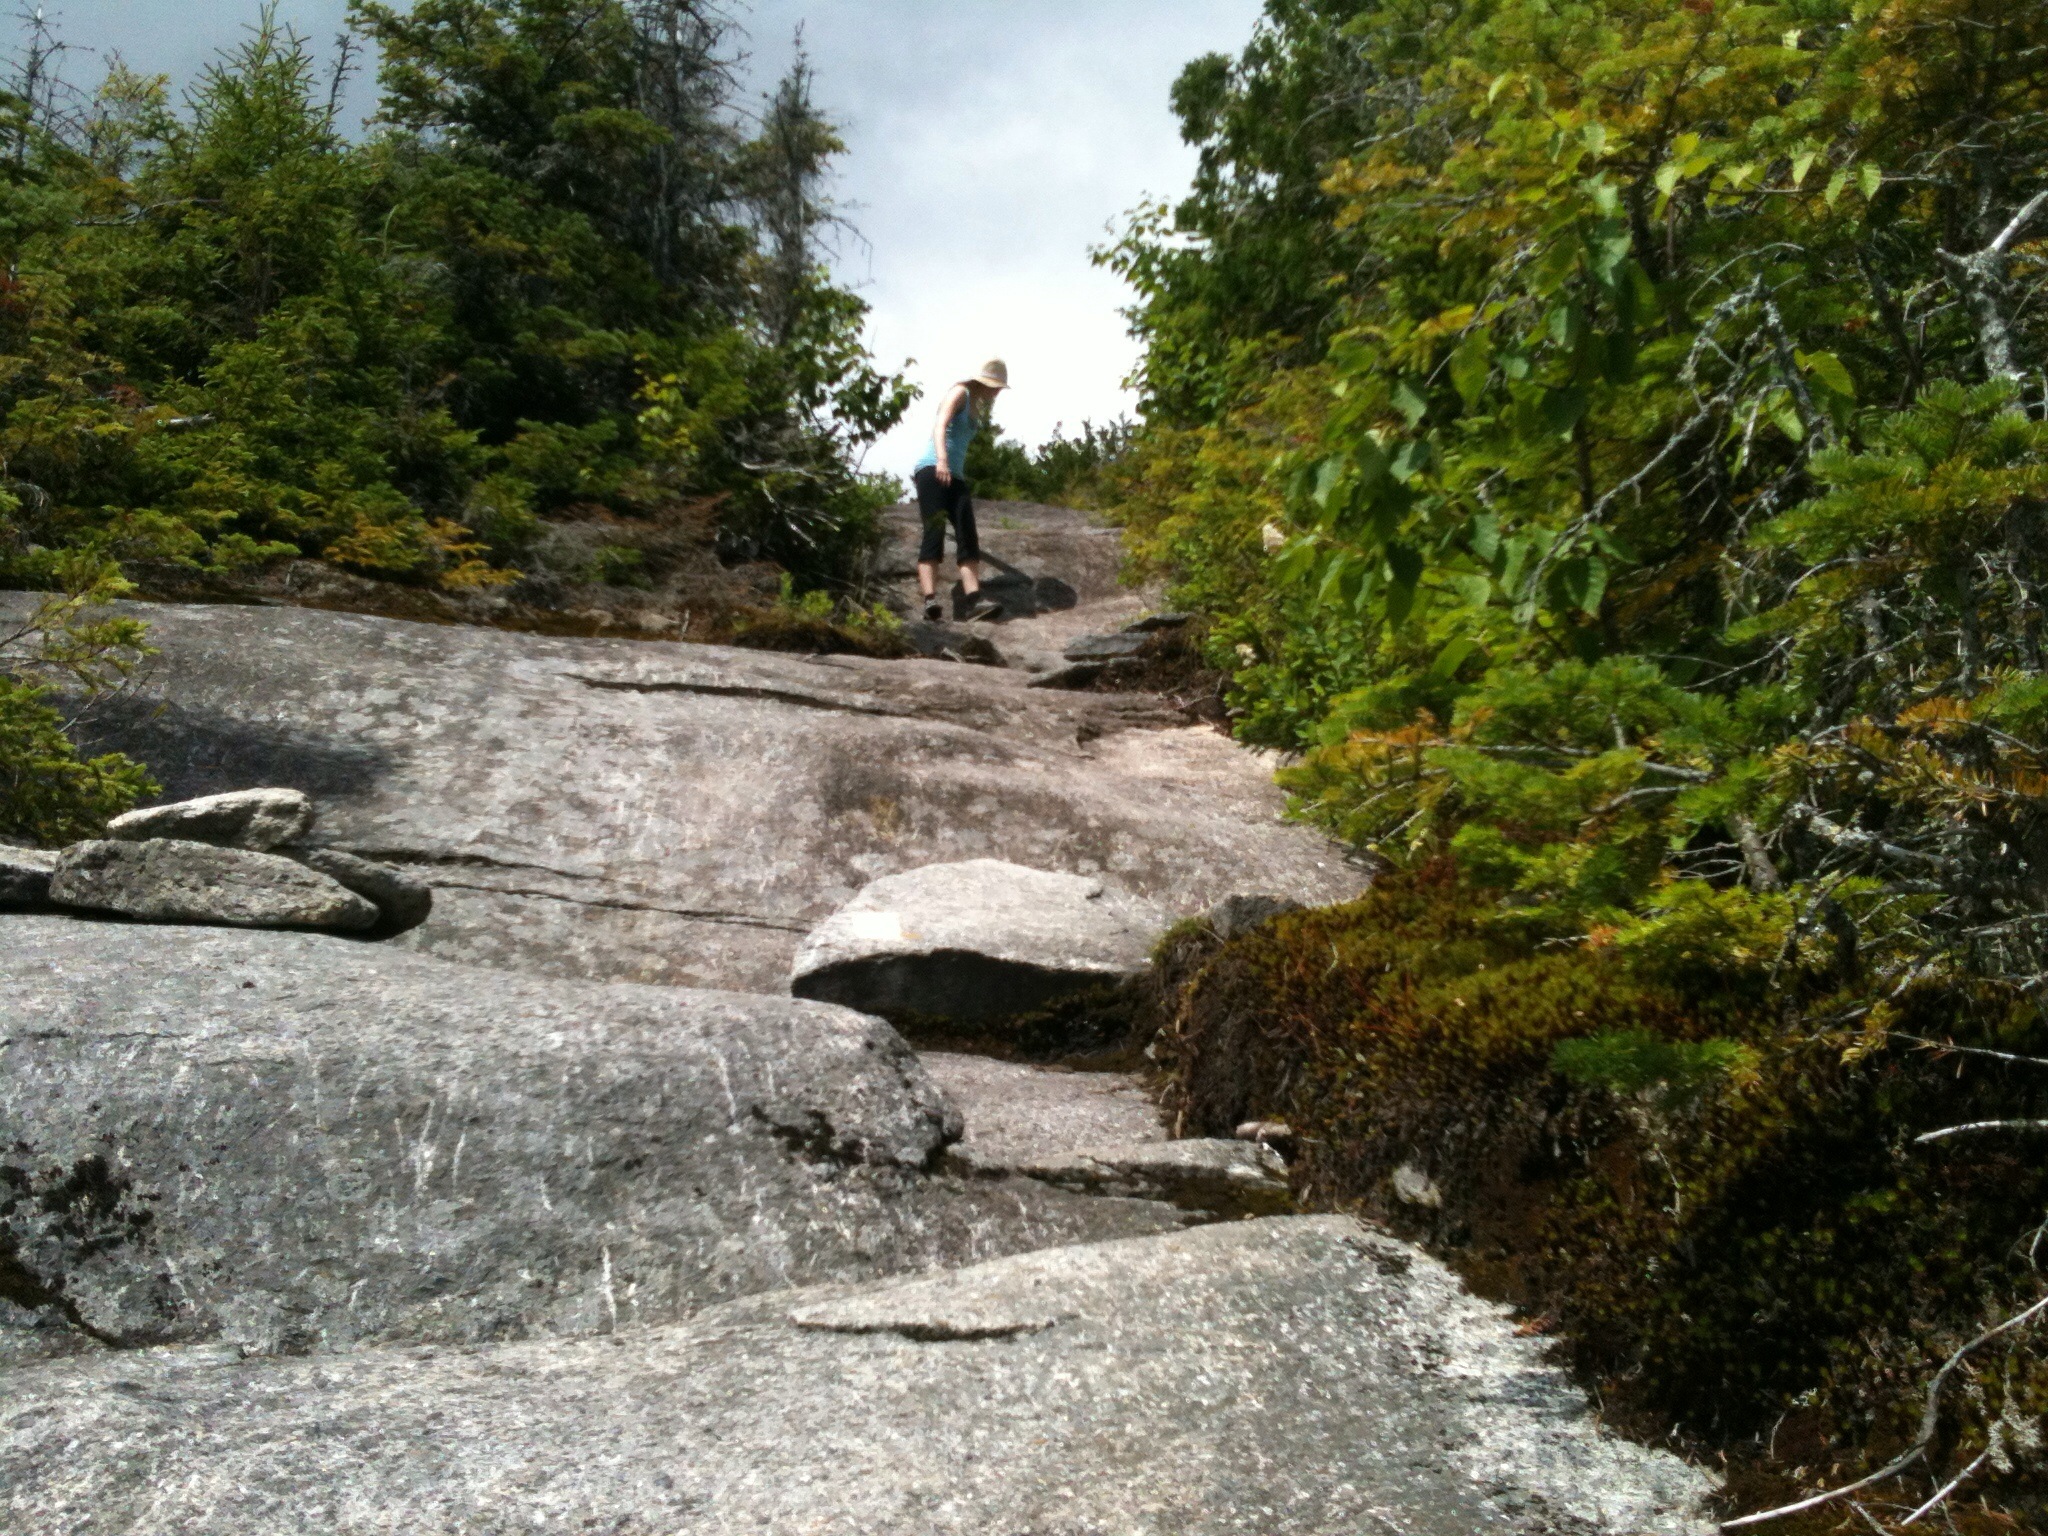 the person is walking on the rock path